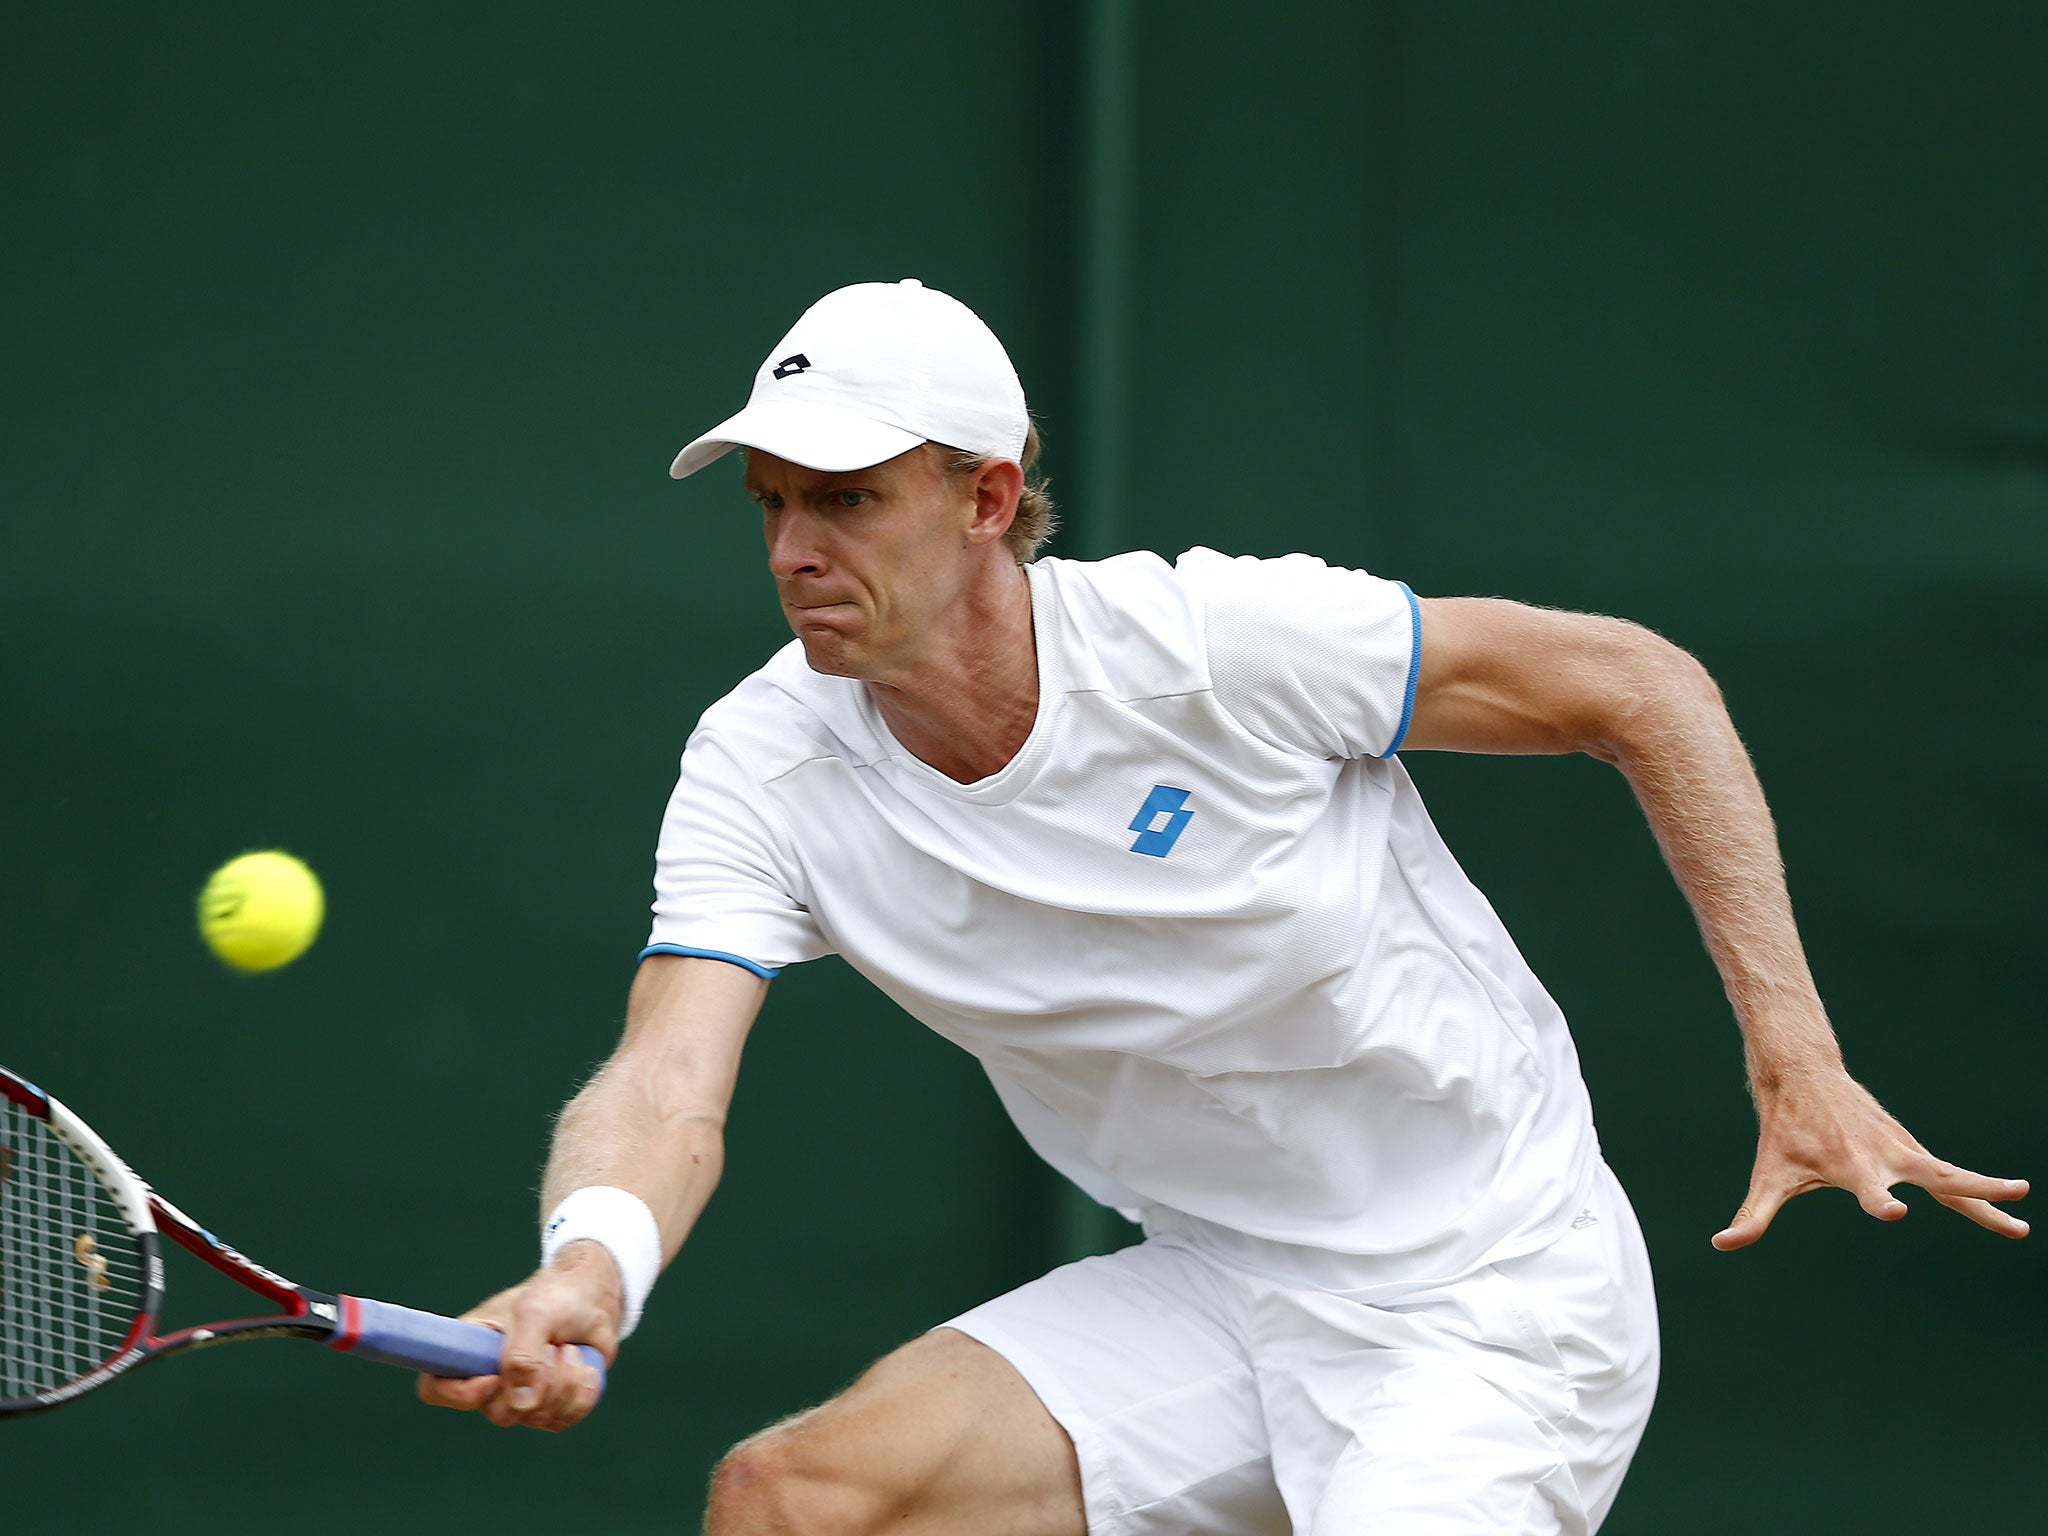 6ft 8in Kevin Anderson is the first South African to reach the fourth round since Wayne Ferreira 14 years ago